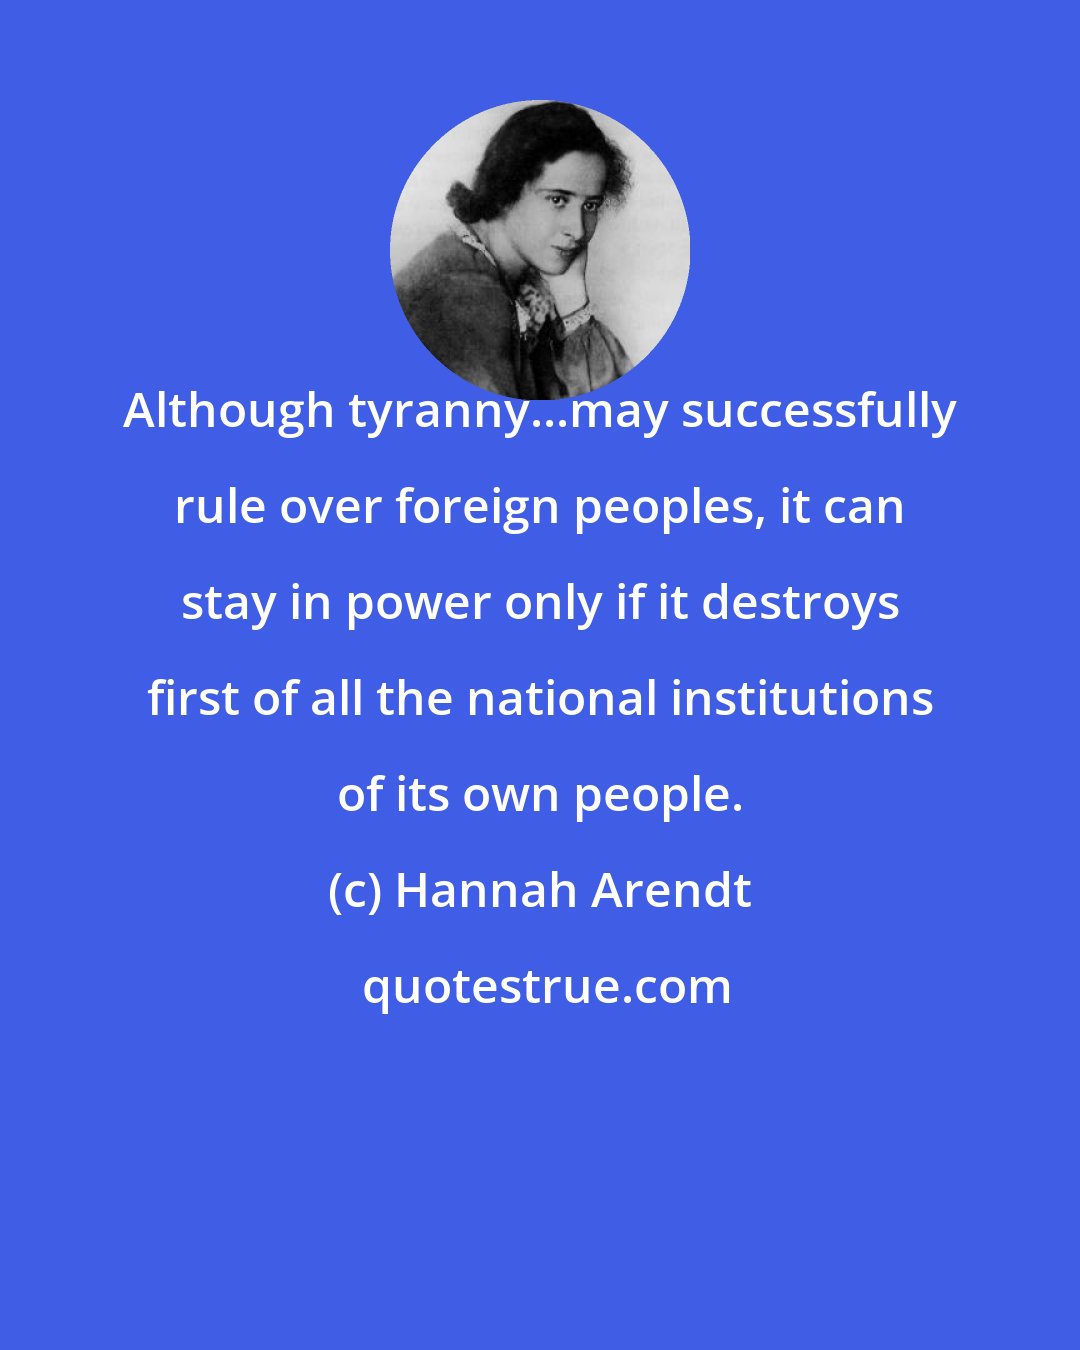 Hannah Arendt: Although tyranny...may successfully rule over foreign peoples, it can stay in power only if it destroys first of all the national institutions of its own people.